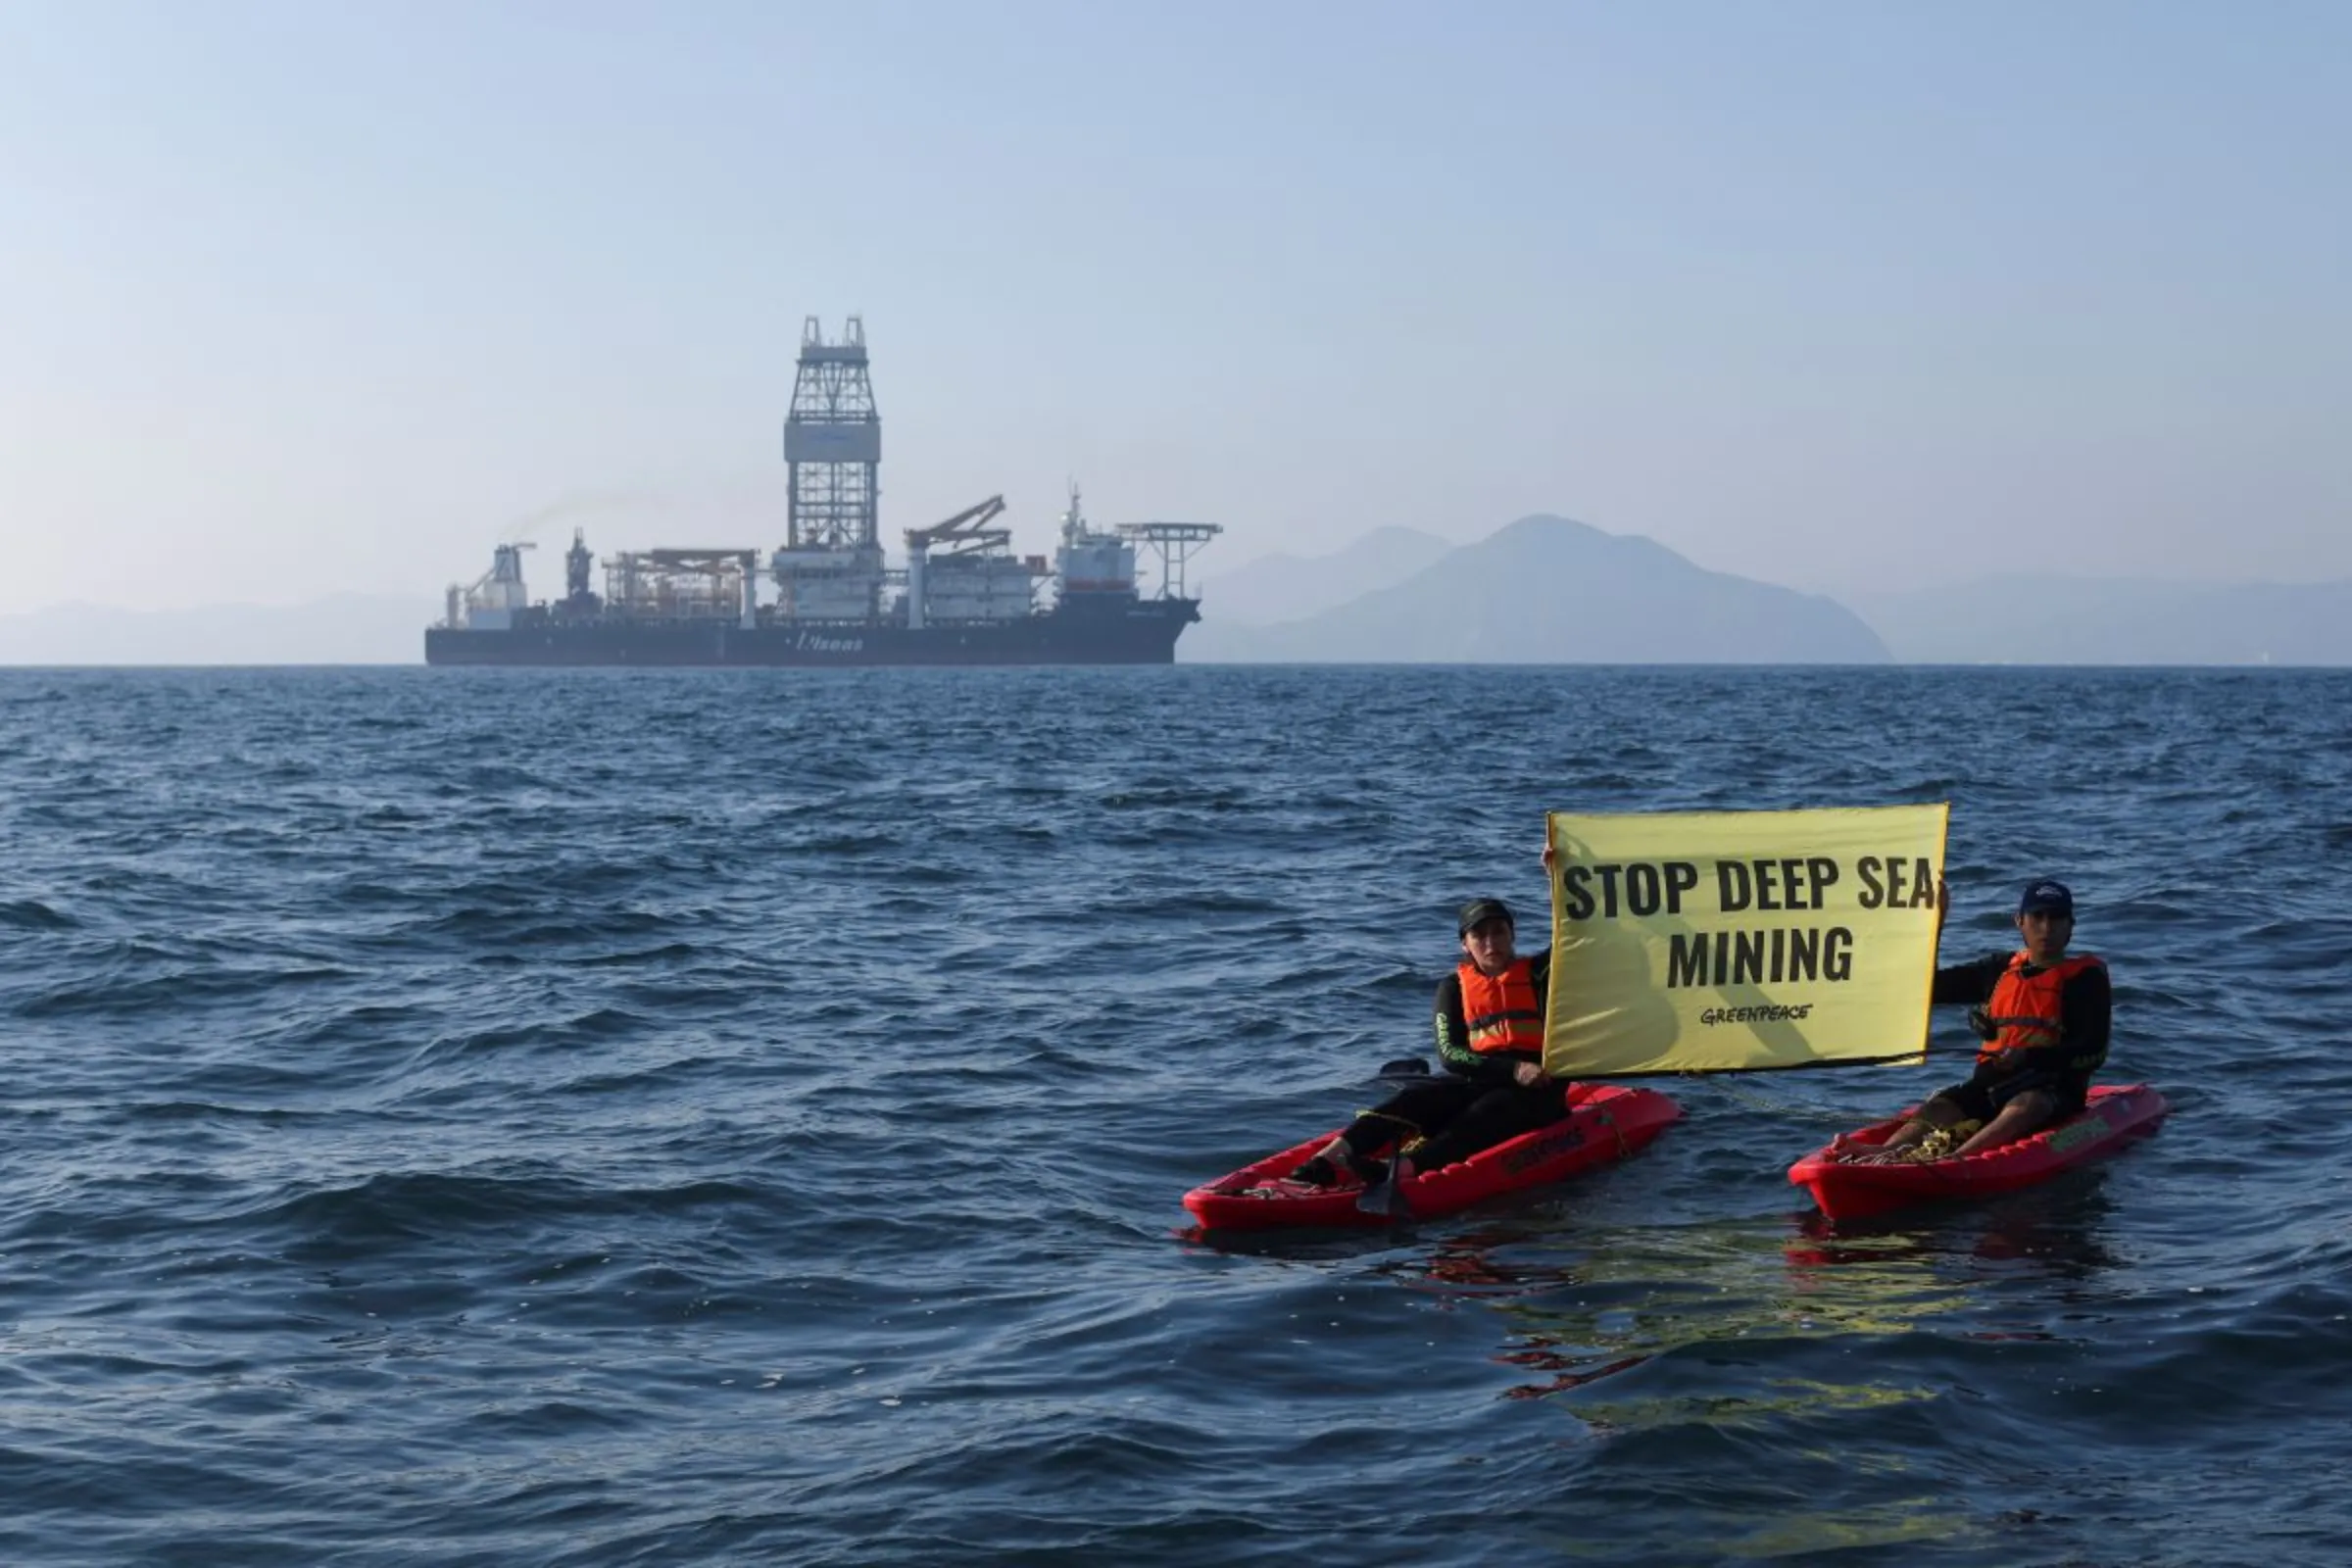 Greenpeace activists confront a deep sea mining vessel as it returned to port from eight weeks of test mining in the Clarion-Clipperton Zone between Mexico and Hawaii, off the coast of Manzanillo, Mexico November 16, 2022. REUTERS/Gustavo Graf